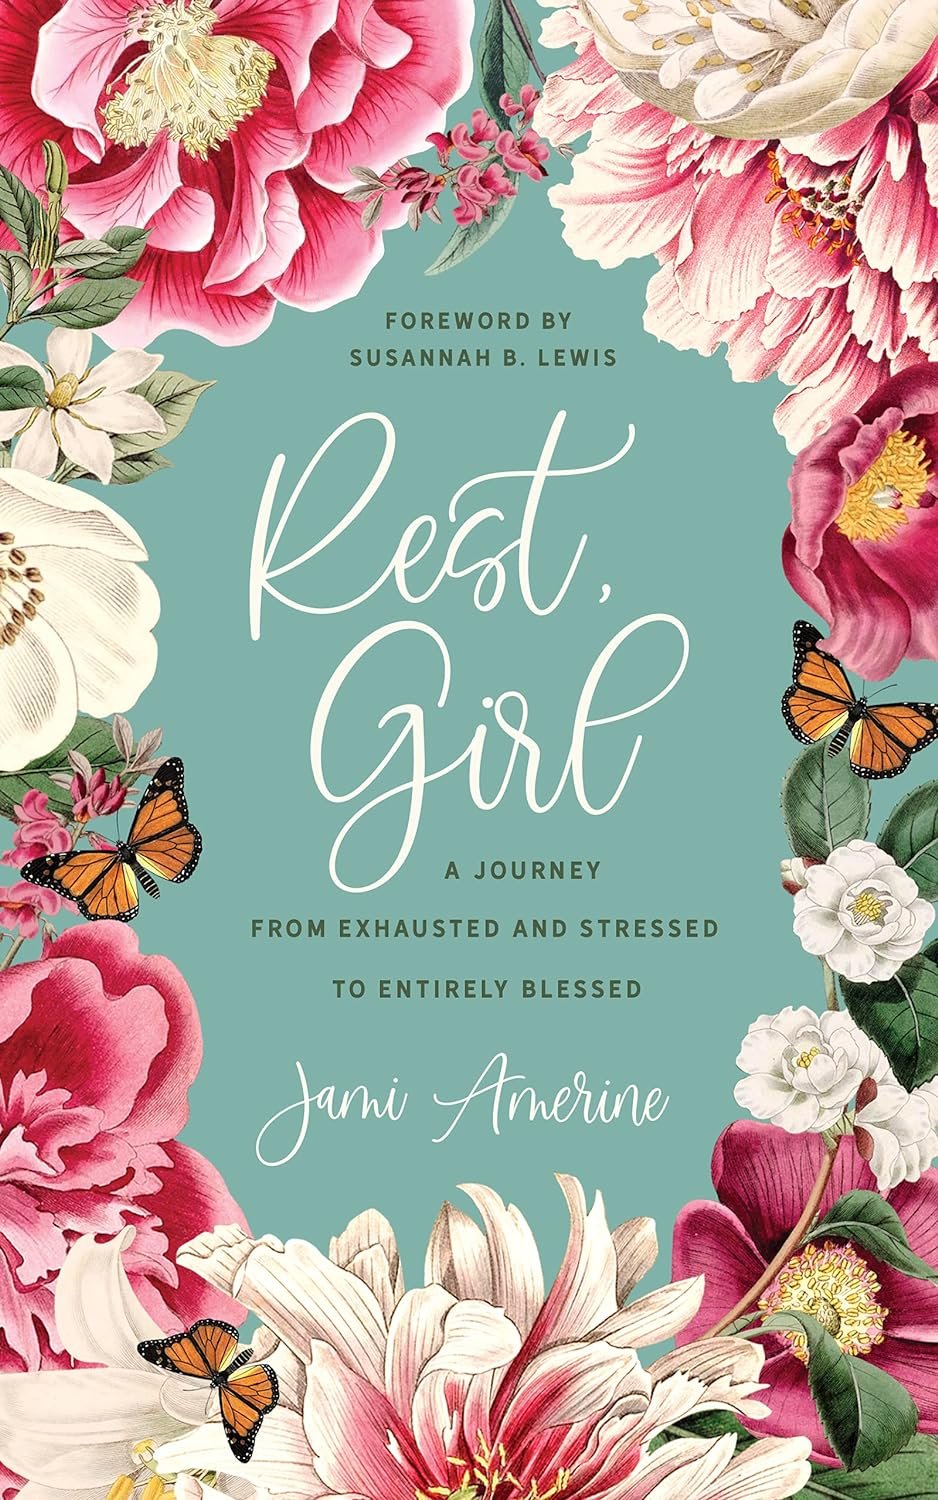 Rest, Girl: A Journey from Exhausted and Stressed to Entirely Blessed